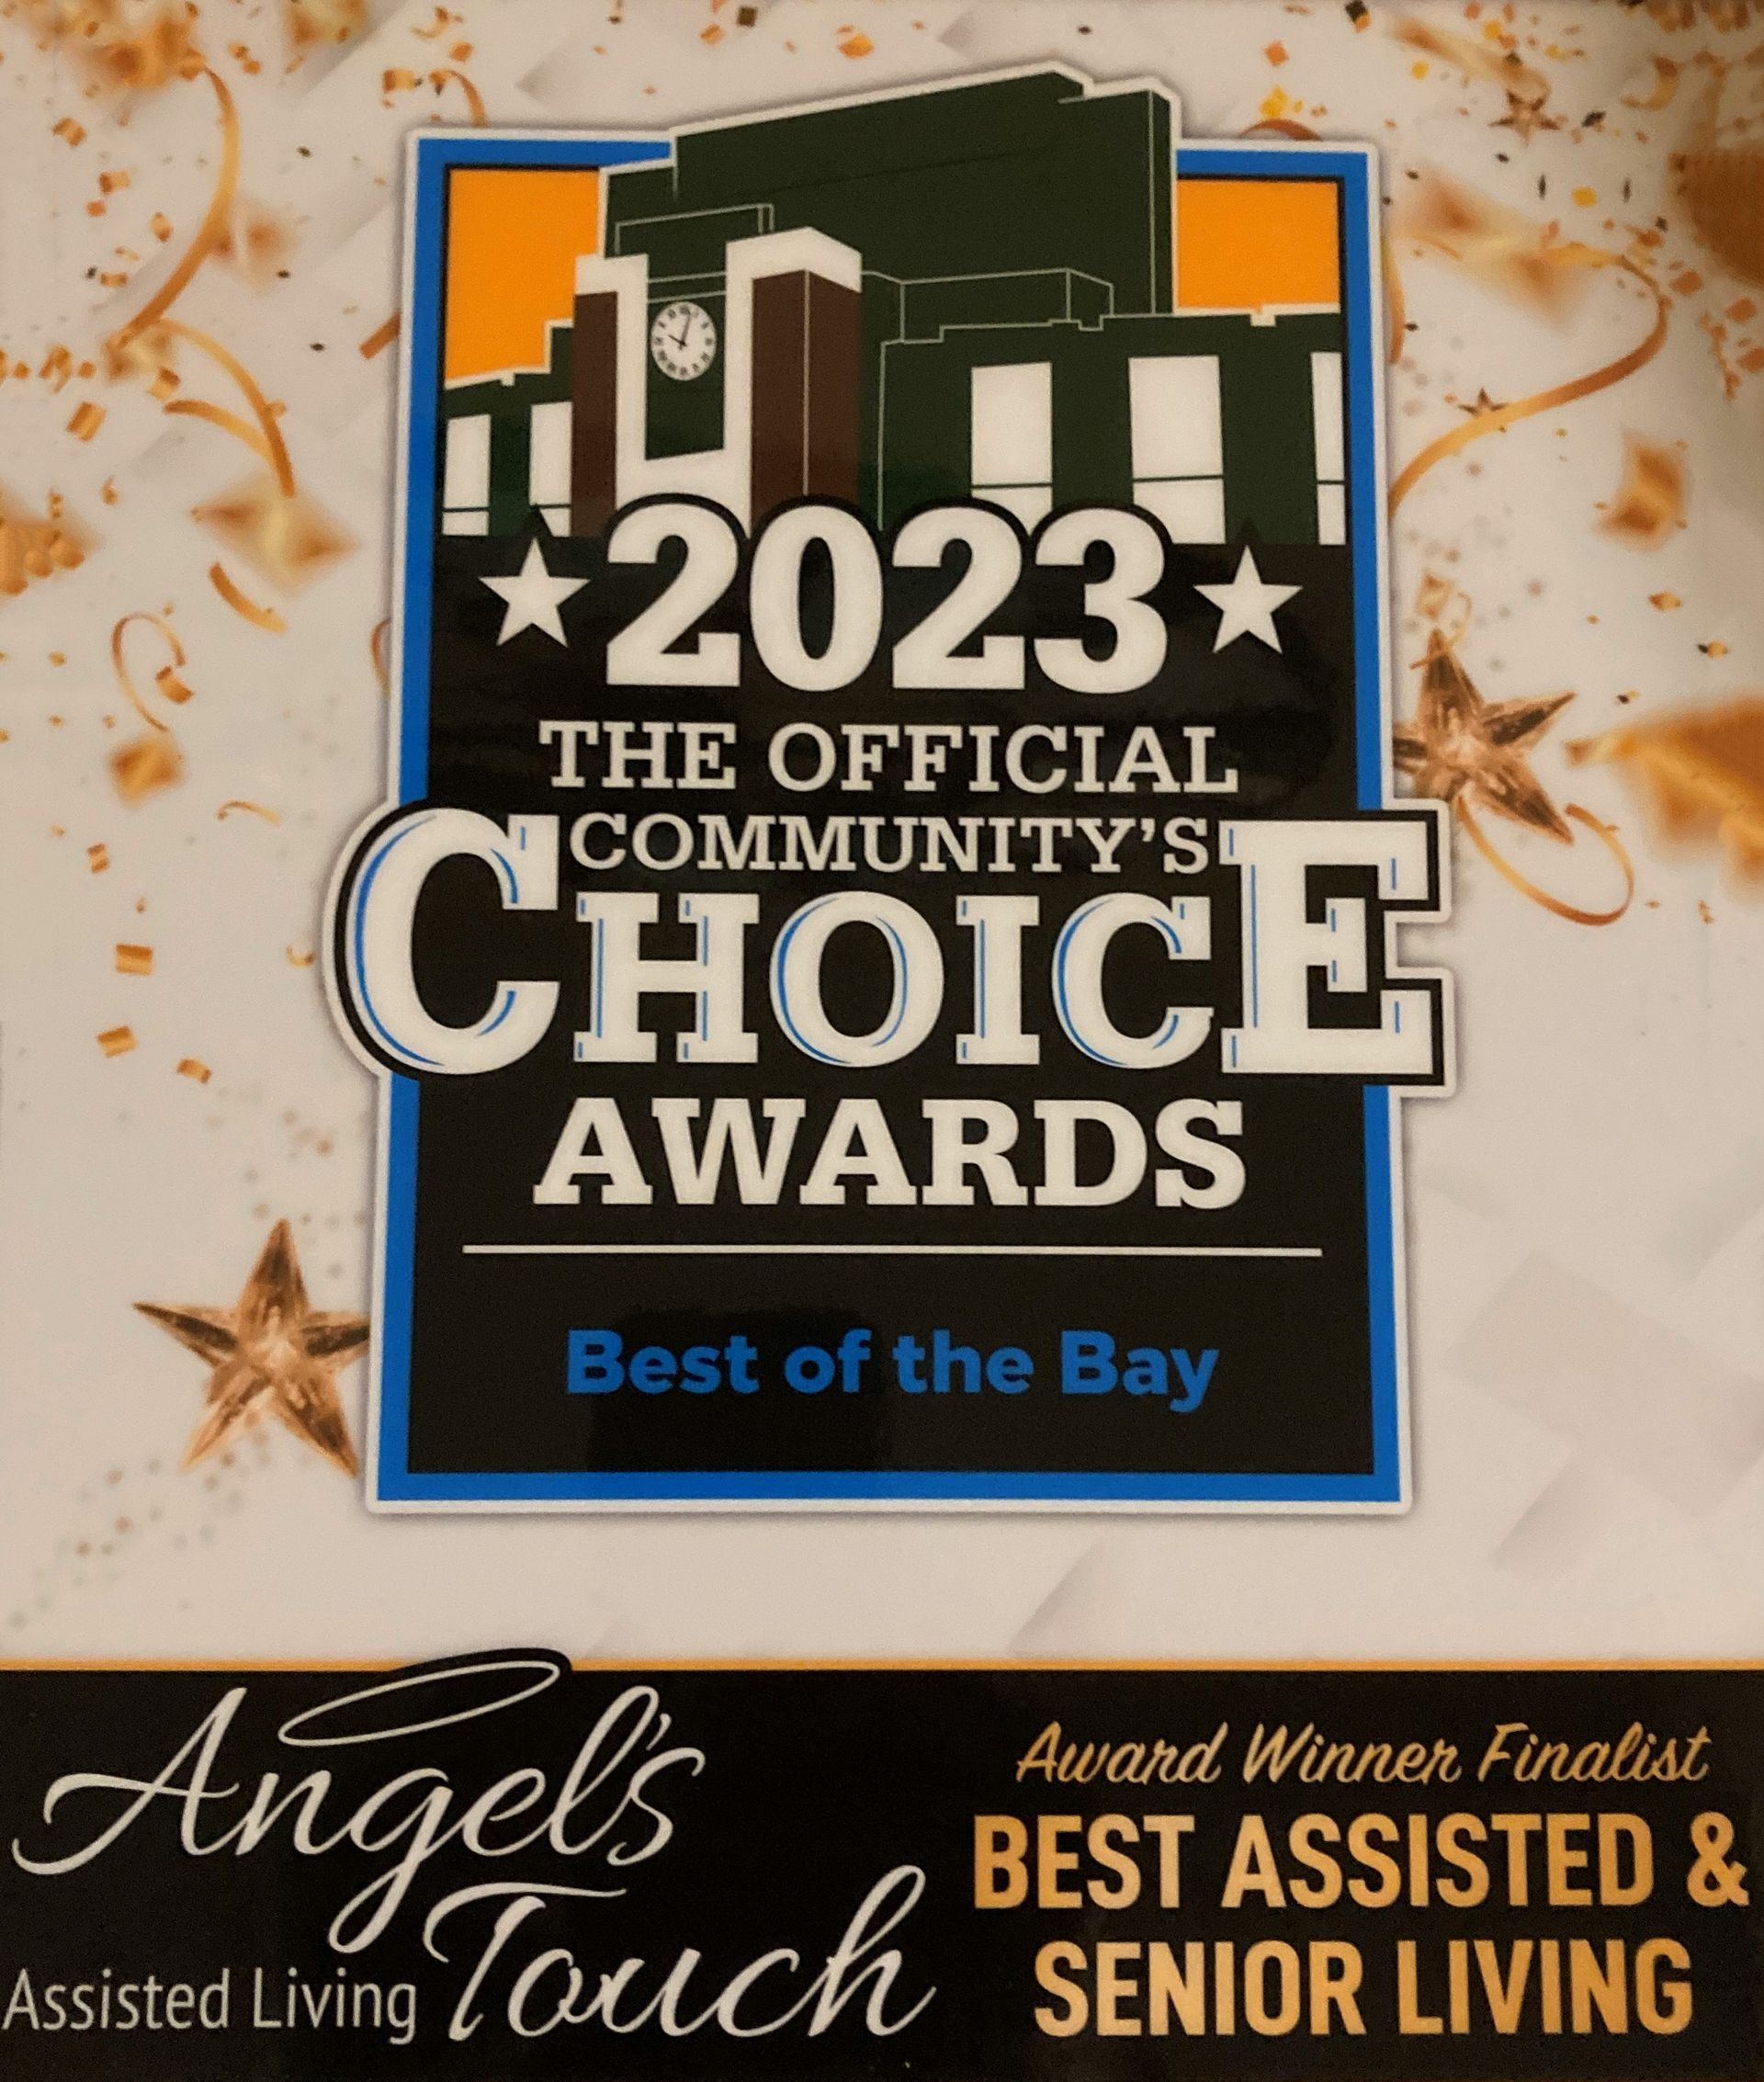 2023 The Official Community's Choice Awards Best of the Bay